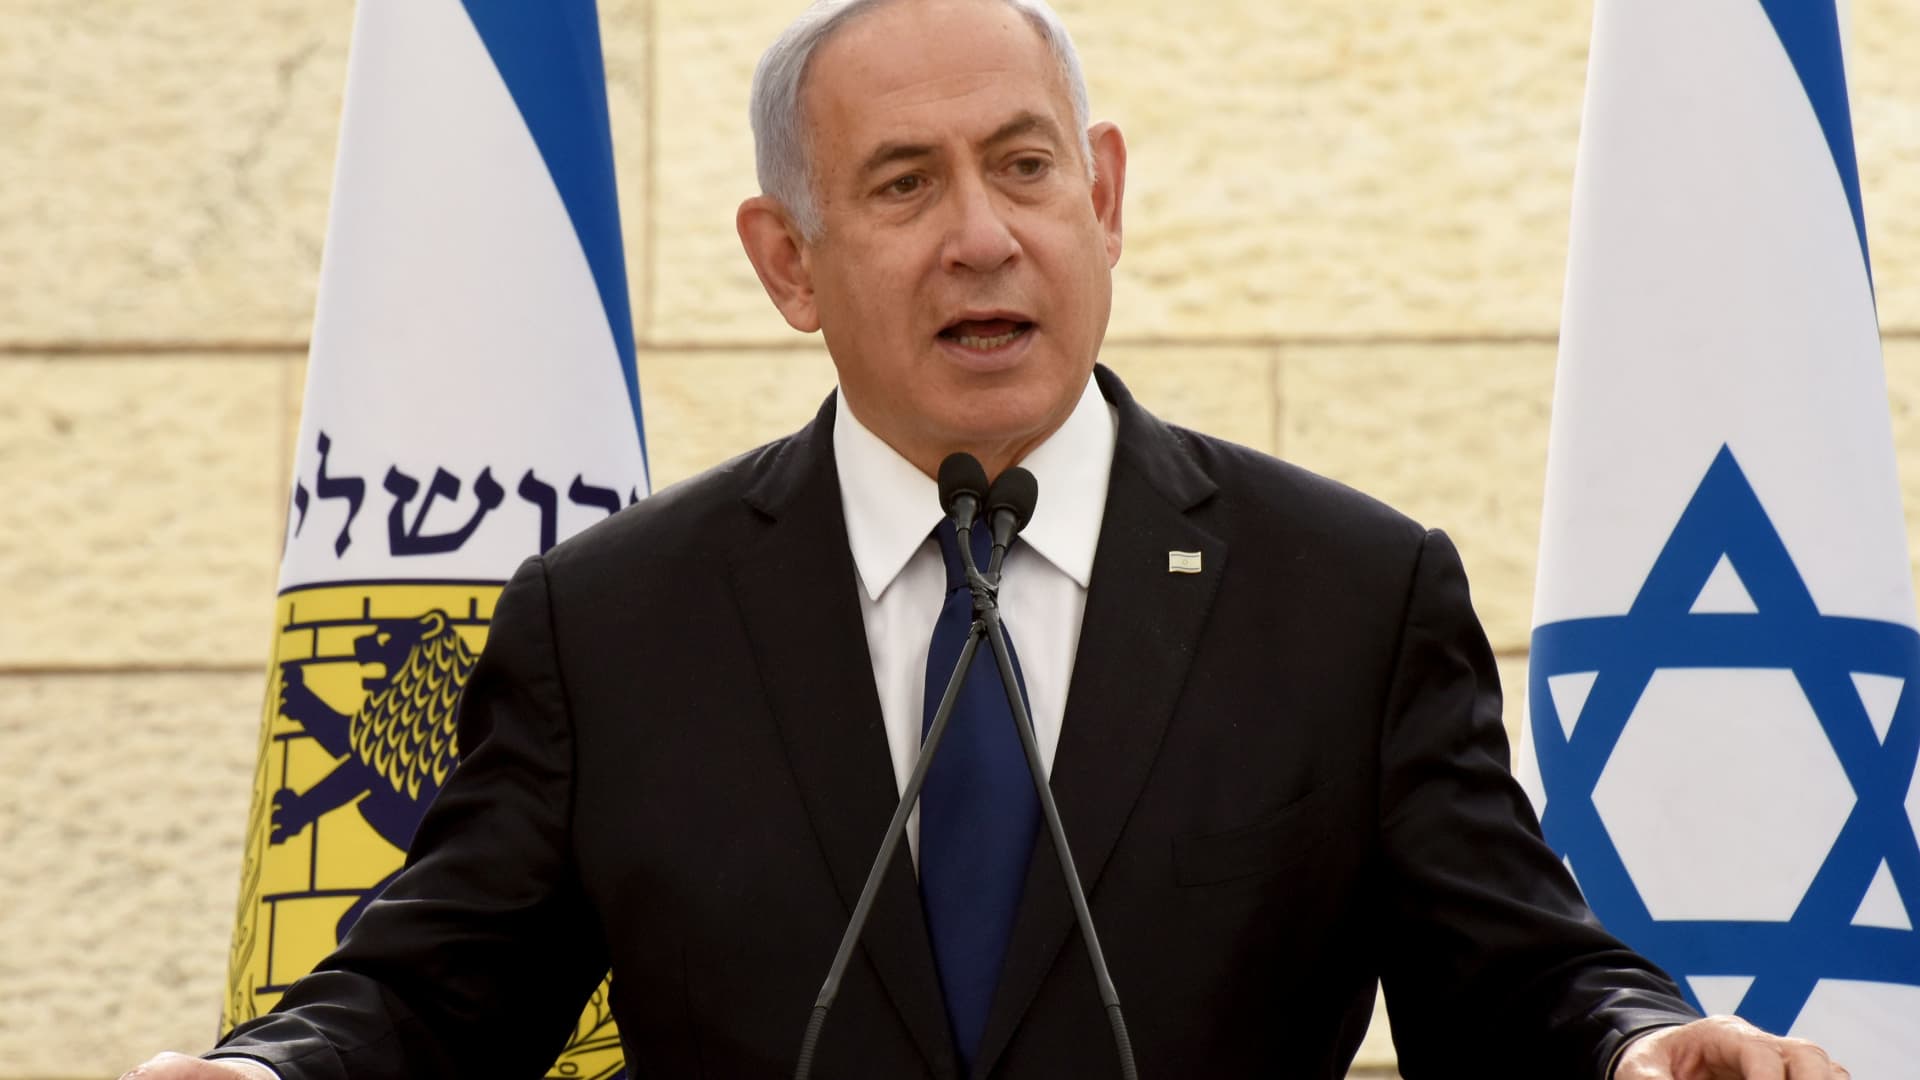 Israel’s Netanyahu, charged with corruption, is set for a dramatic comeback in 5th election since 2019